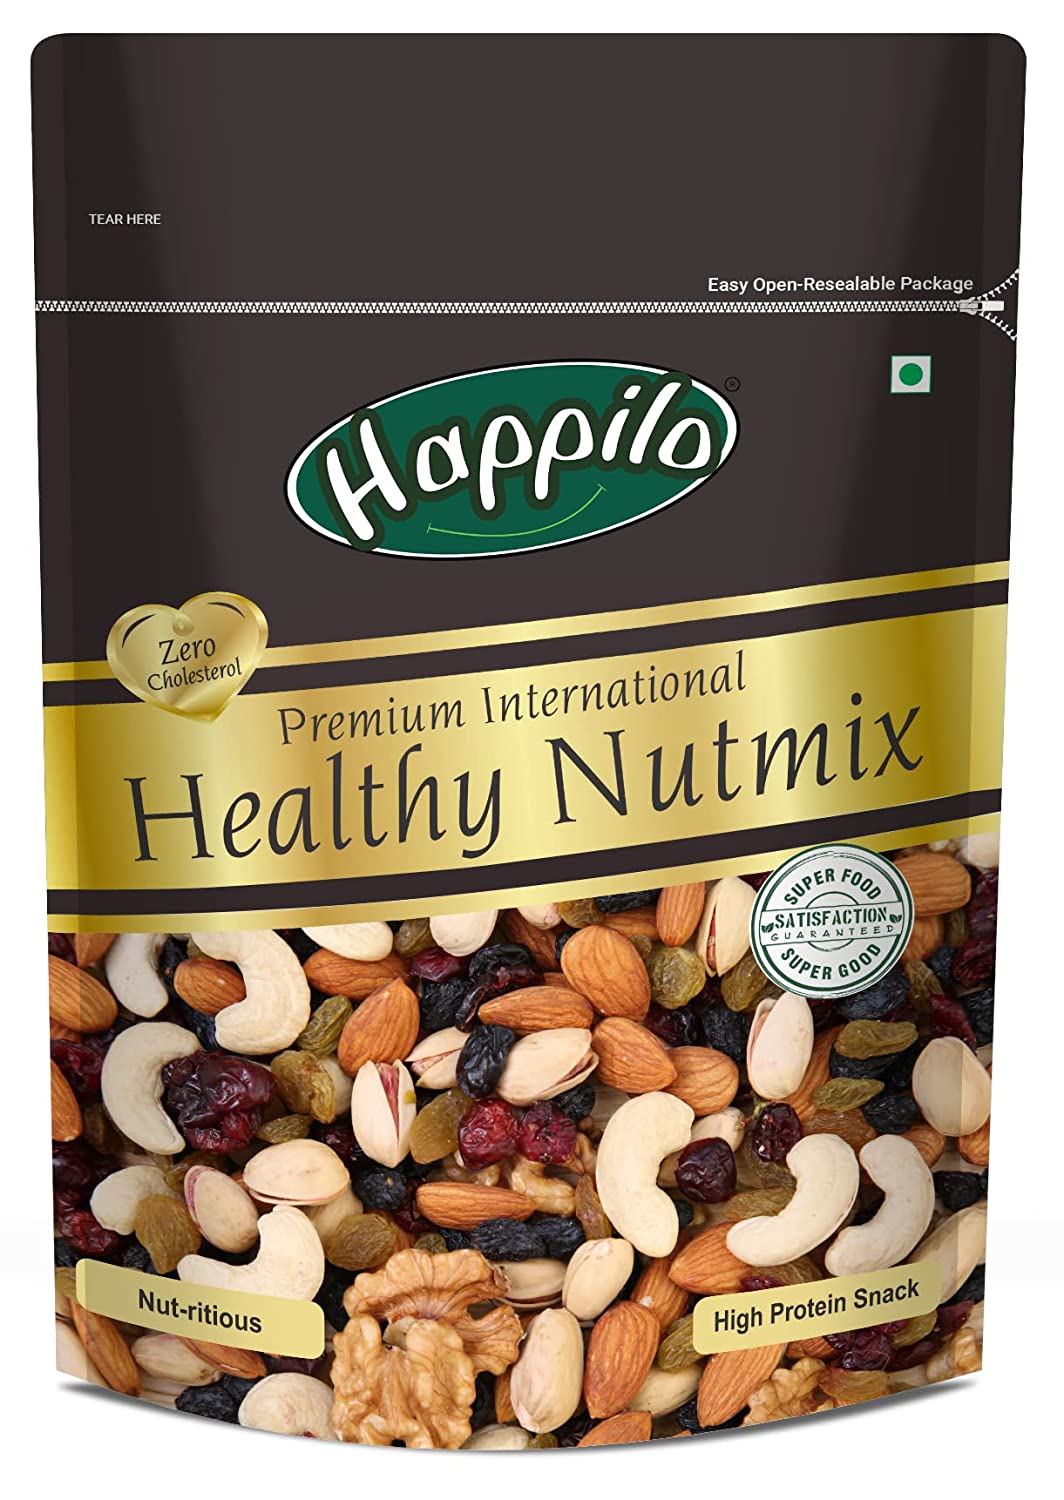 Healthy & Nutritious Nutmix